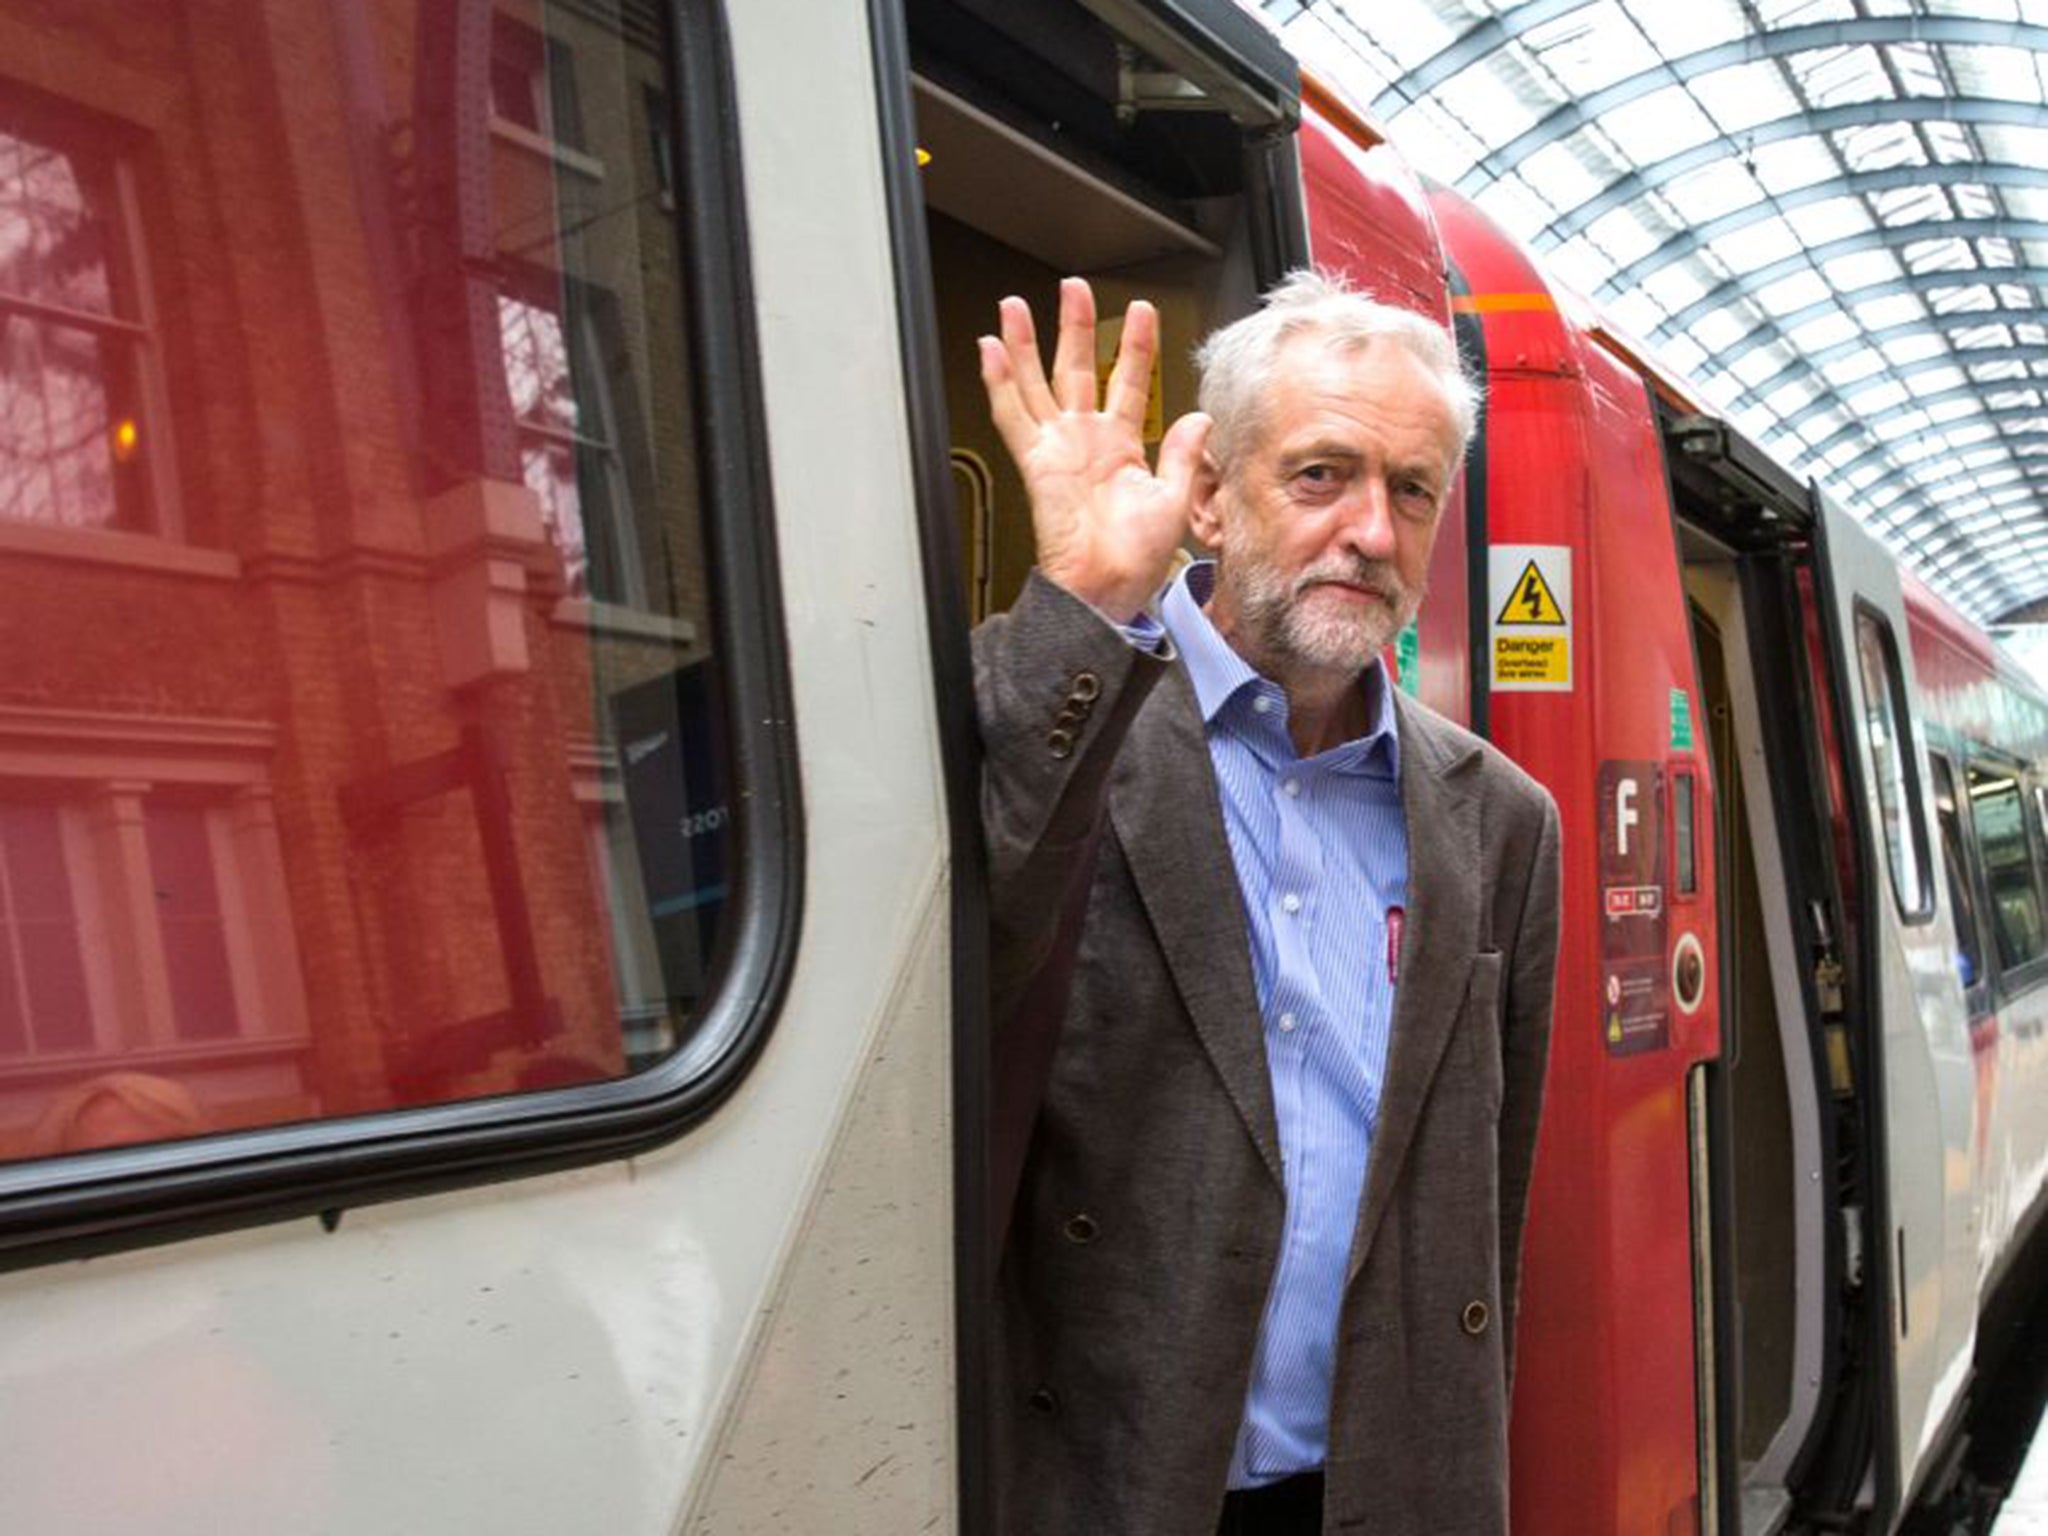 Jeremy Corbyn's plans for a “People’s Railway” would lead to a third of franchises being brought under public ownership by 2025 if he became prime minister in 2020